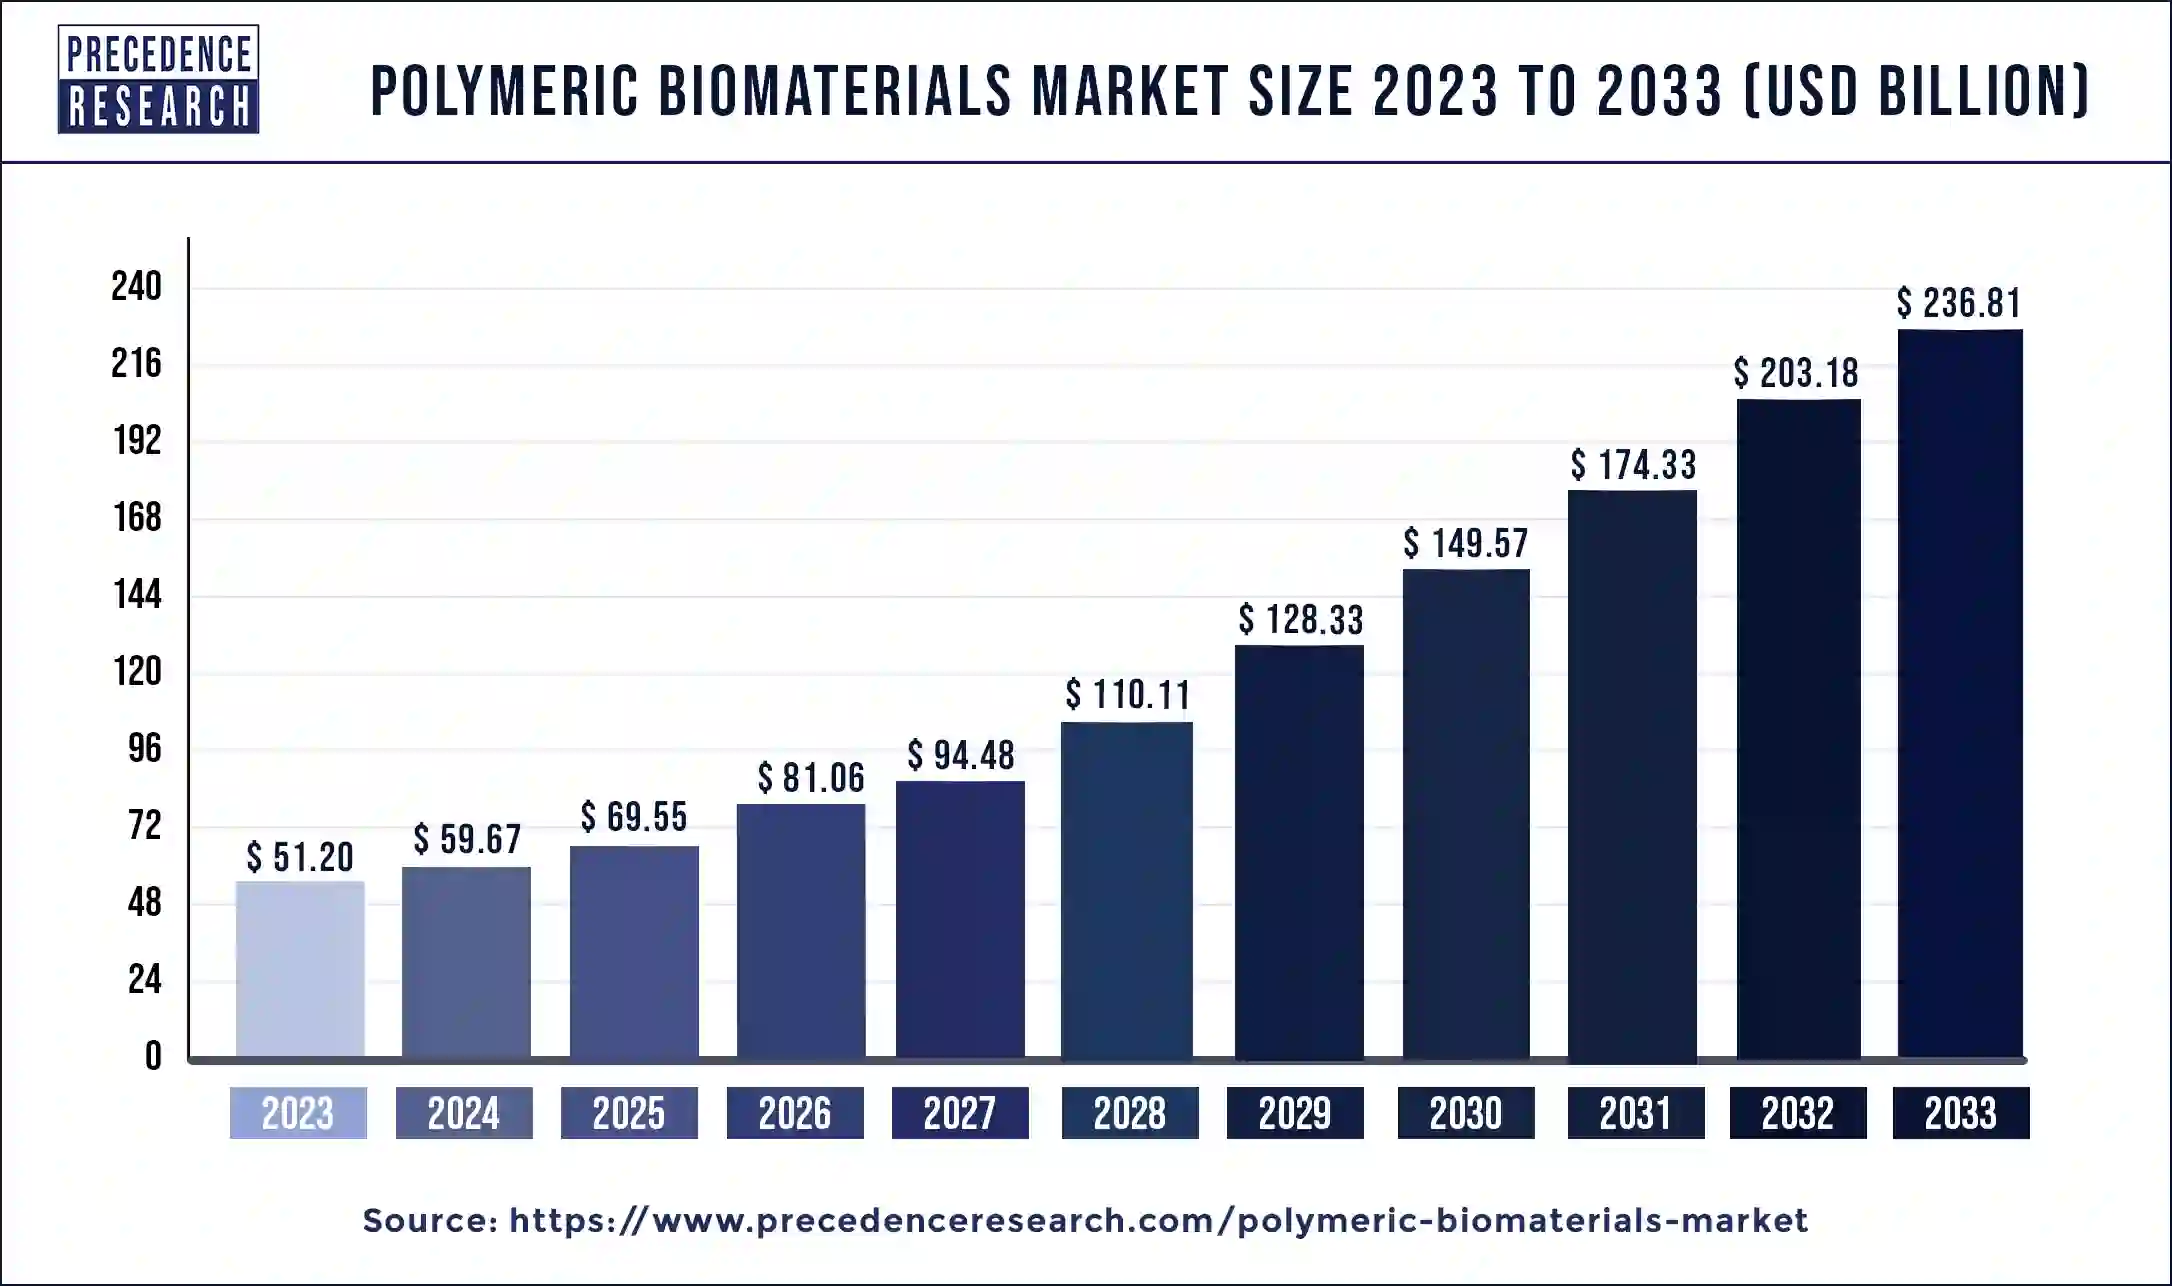 Polymeric Biomaterials Market Size 2024 to 2033